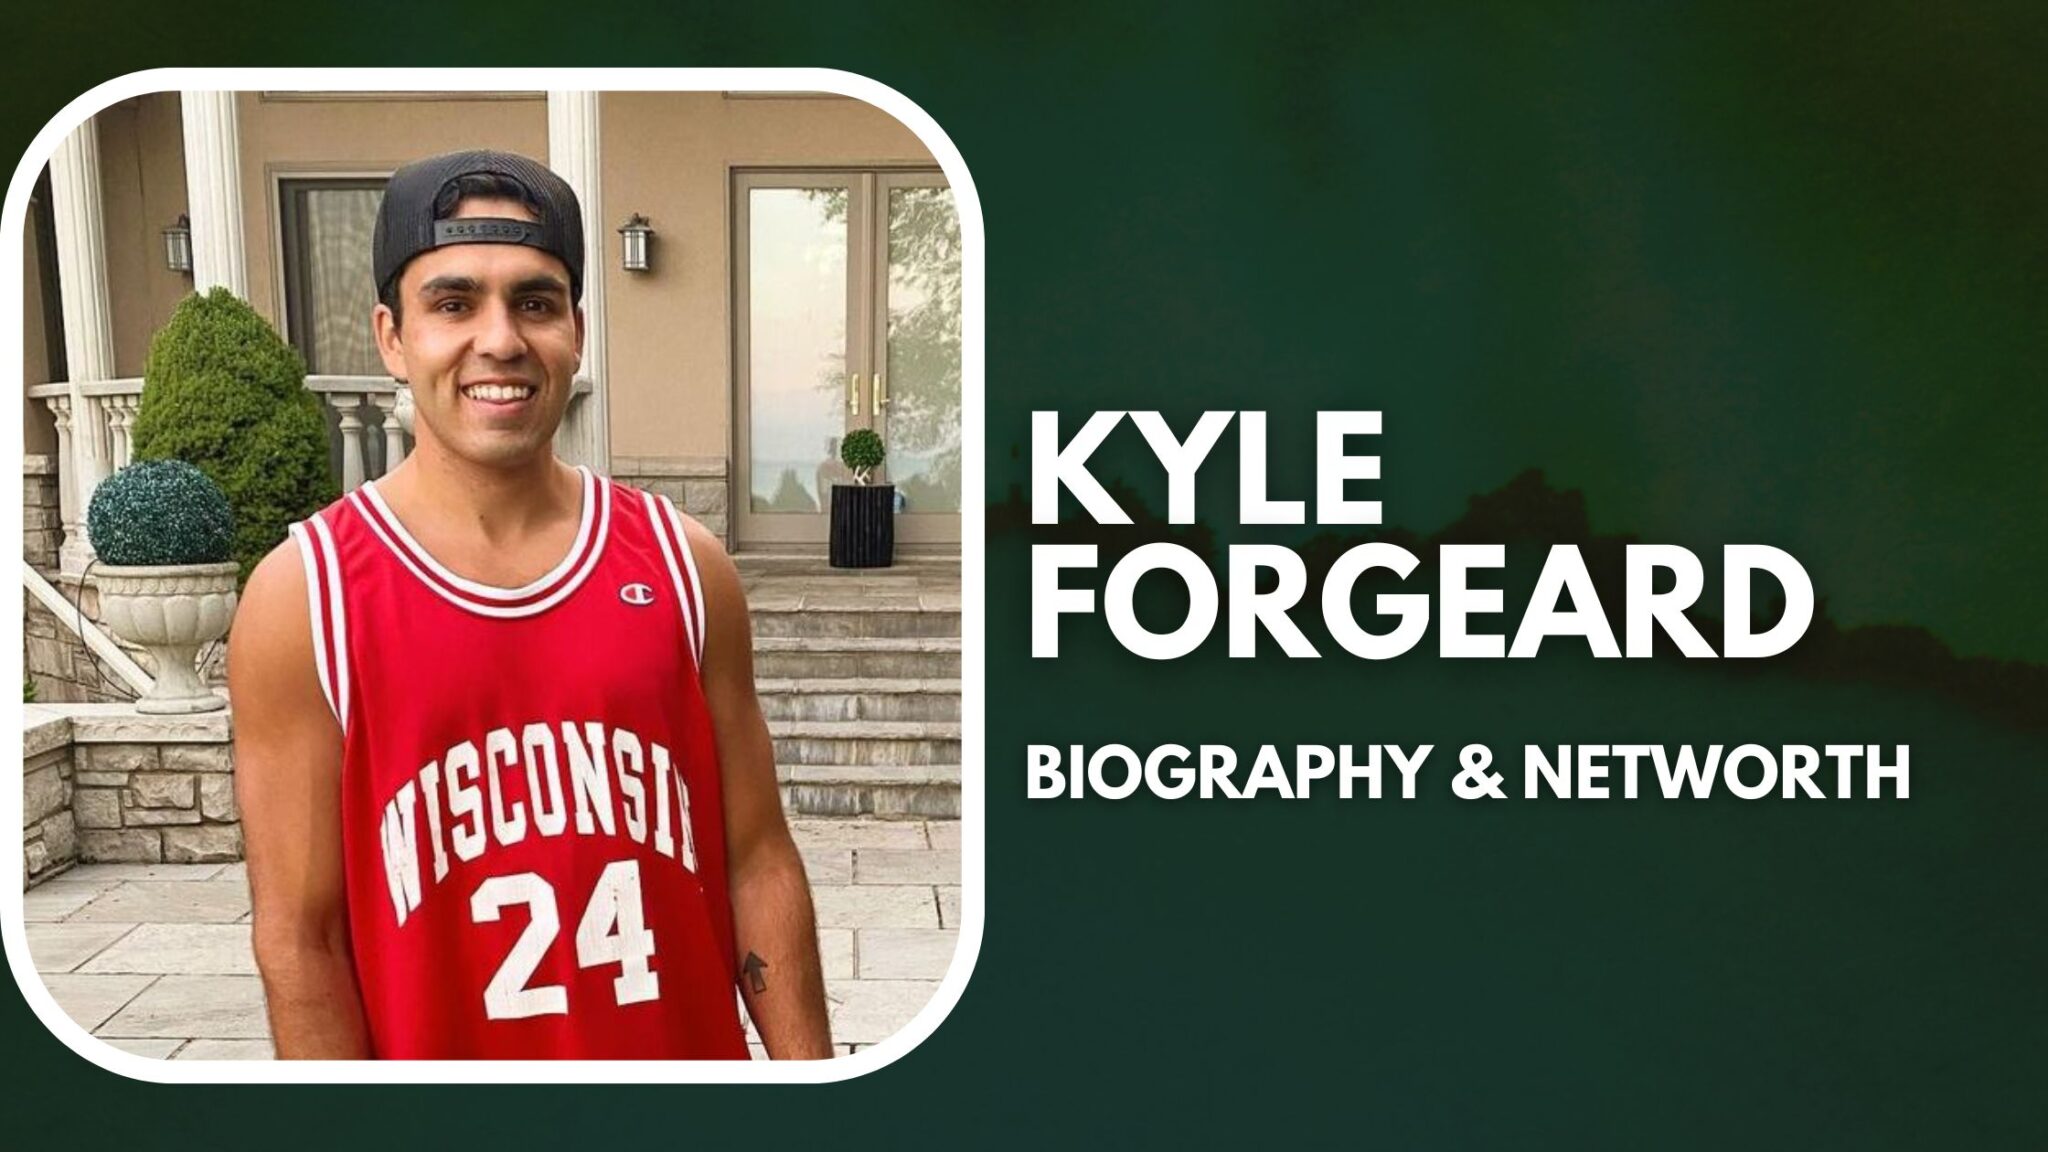 Kyle Biography, Net Worth and Career